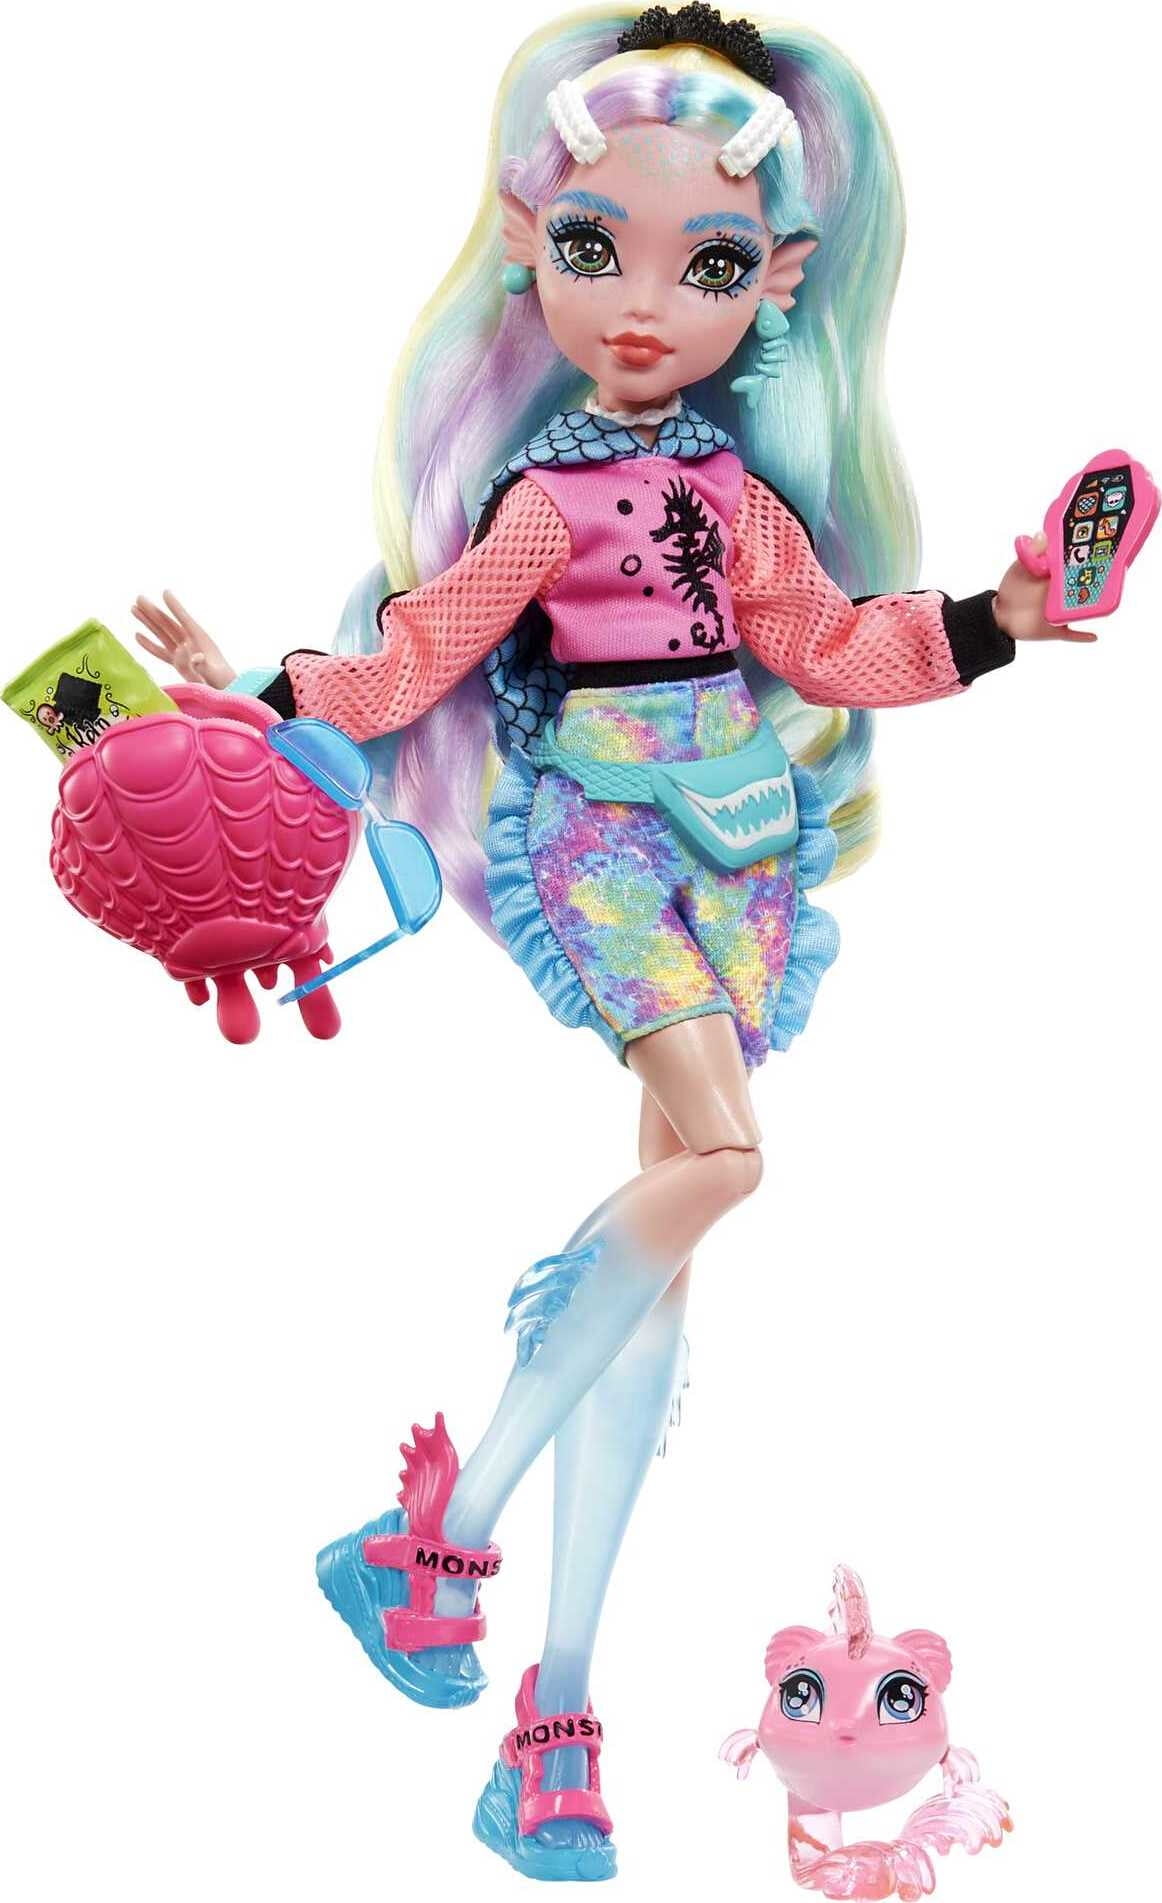 Monster High Lagoona Blue Fashion Doll with Colorful Streaked Hair, Accessories & Pet Piranha